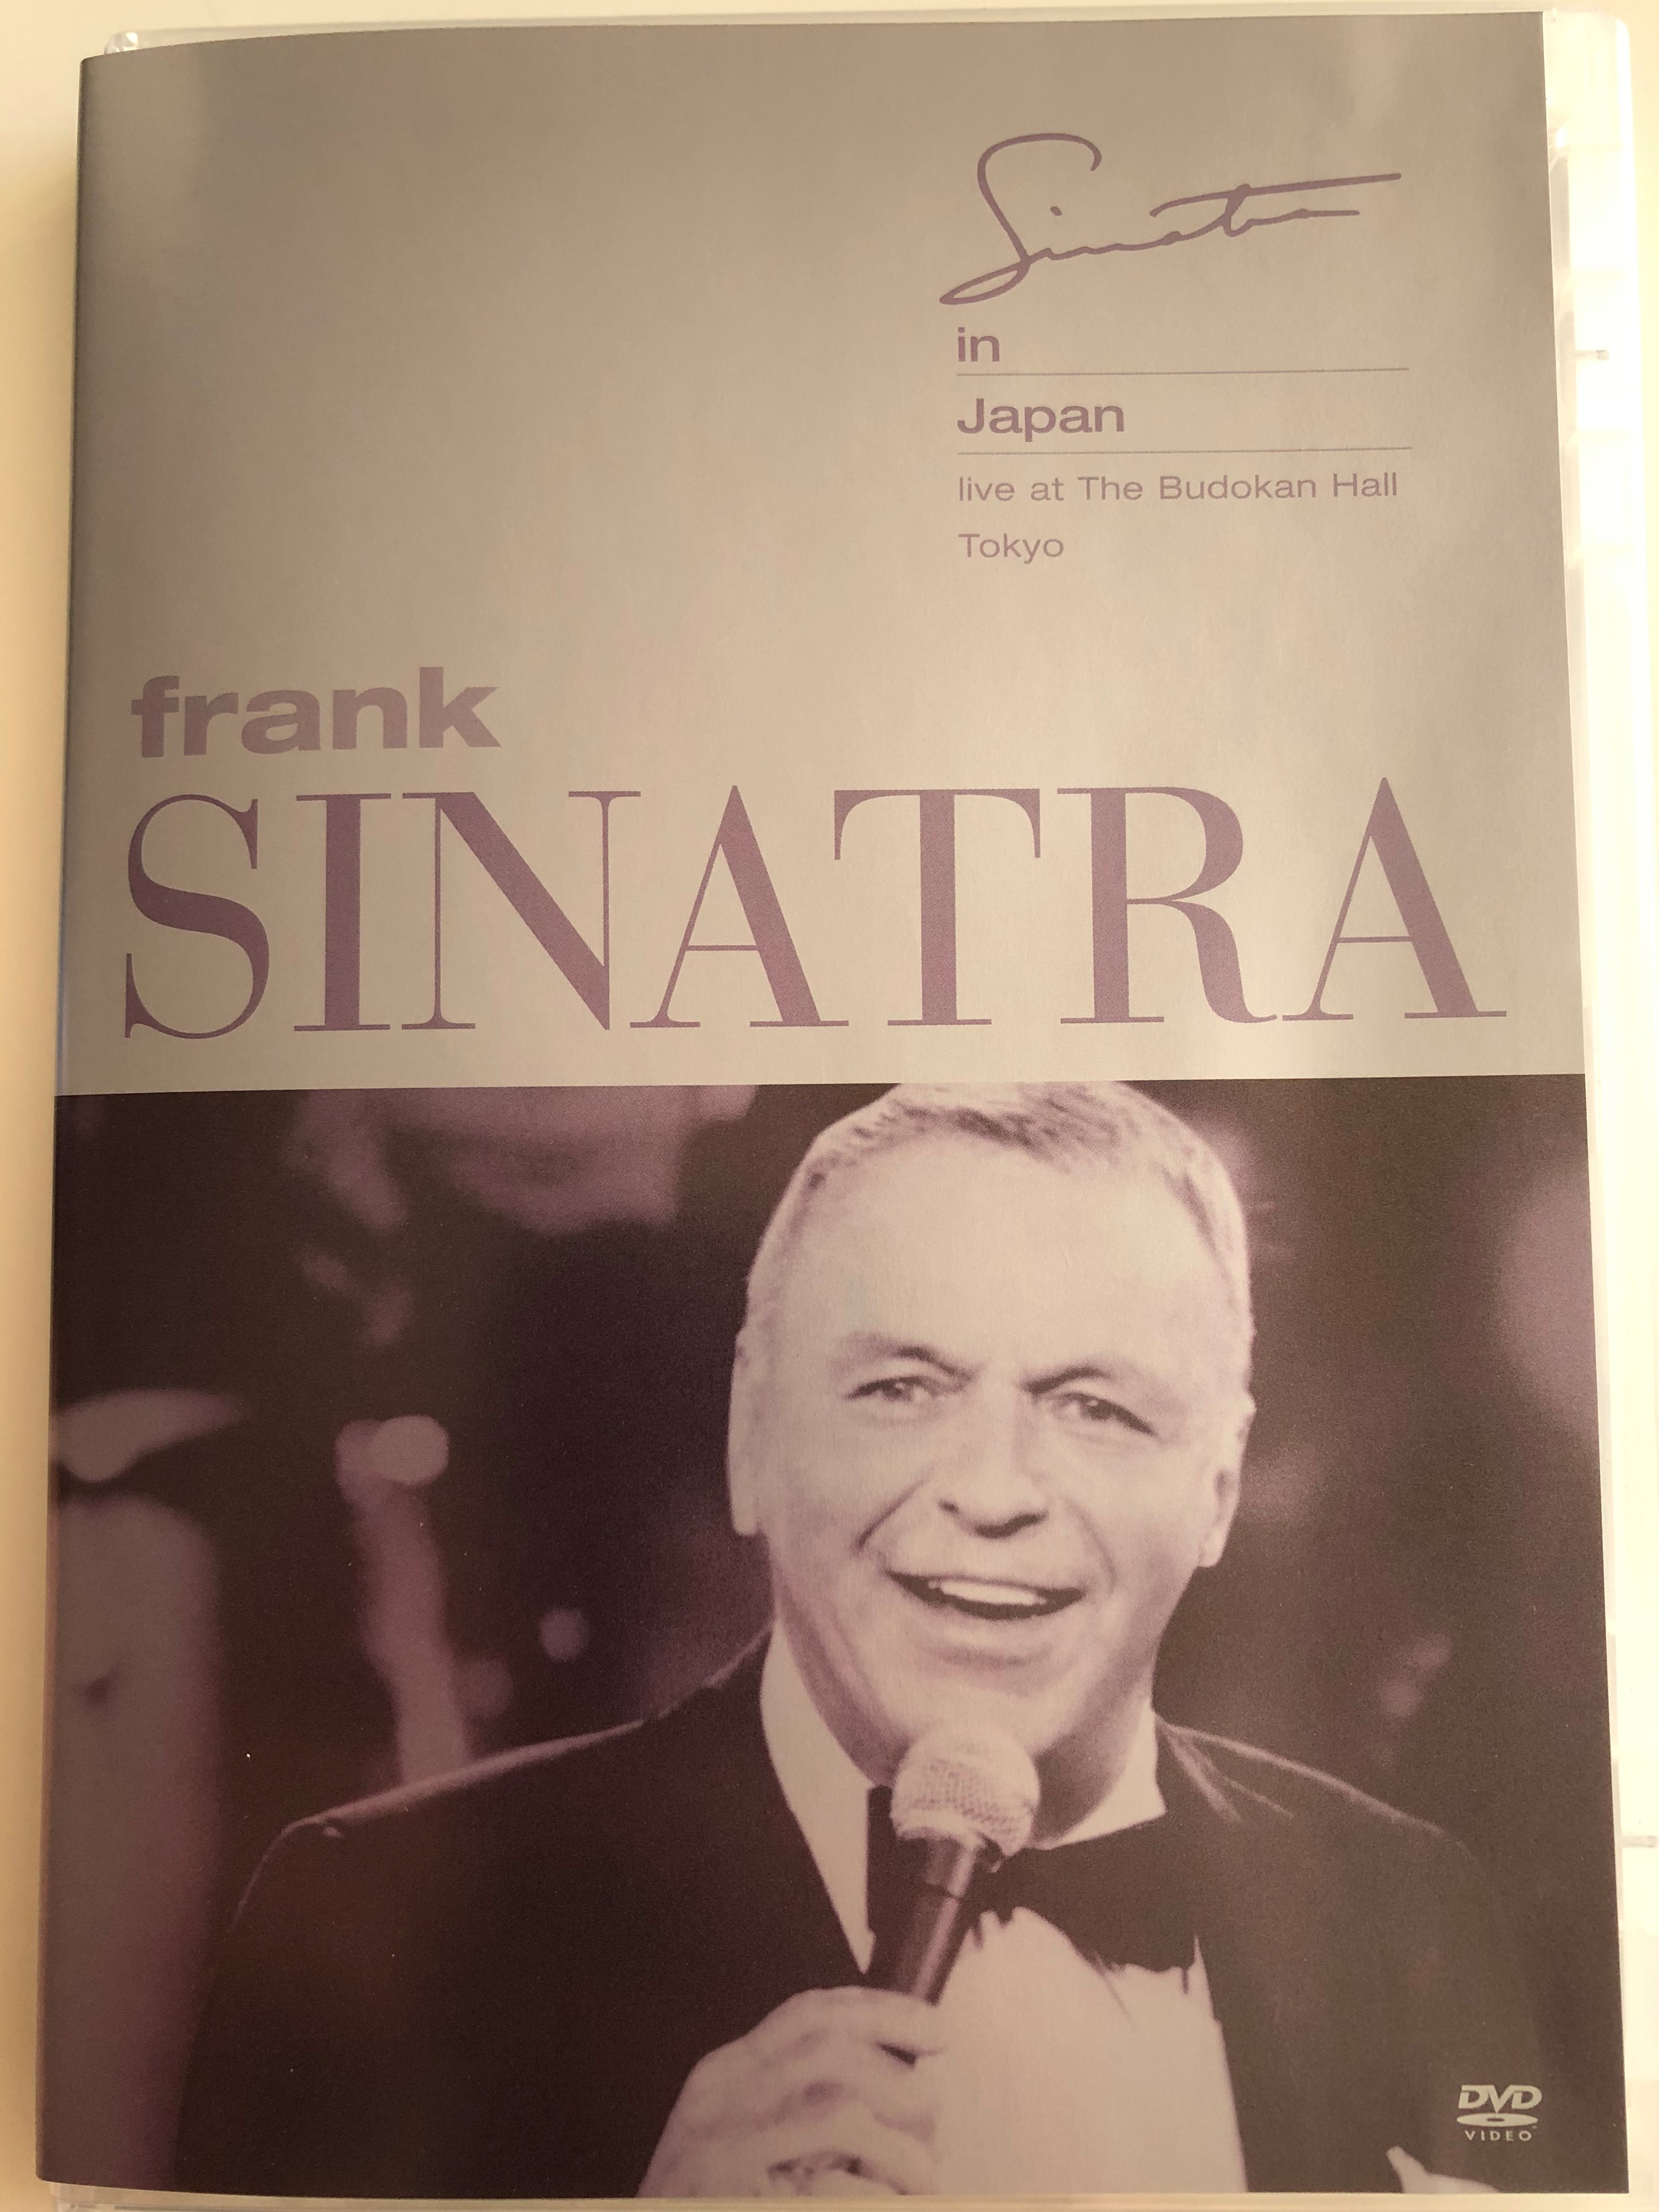 Frank Sinatra in Japan DVD 1985 Live at the Budokan Hall, Tokyo / Directed  by Joe Parnello / Produced by Danny O'Donovan - bibleinmylanguage